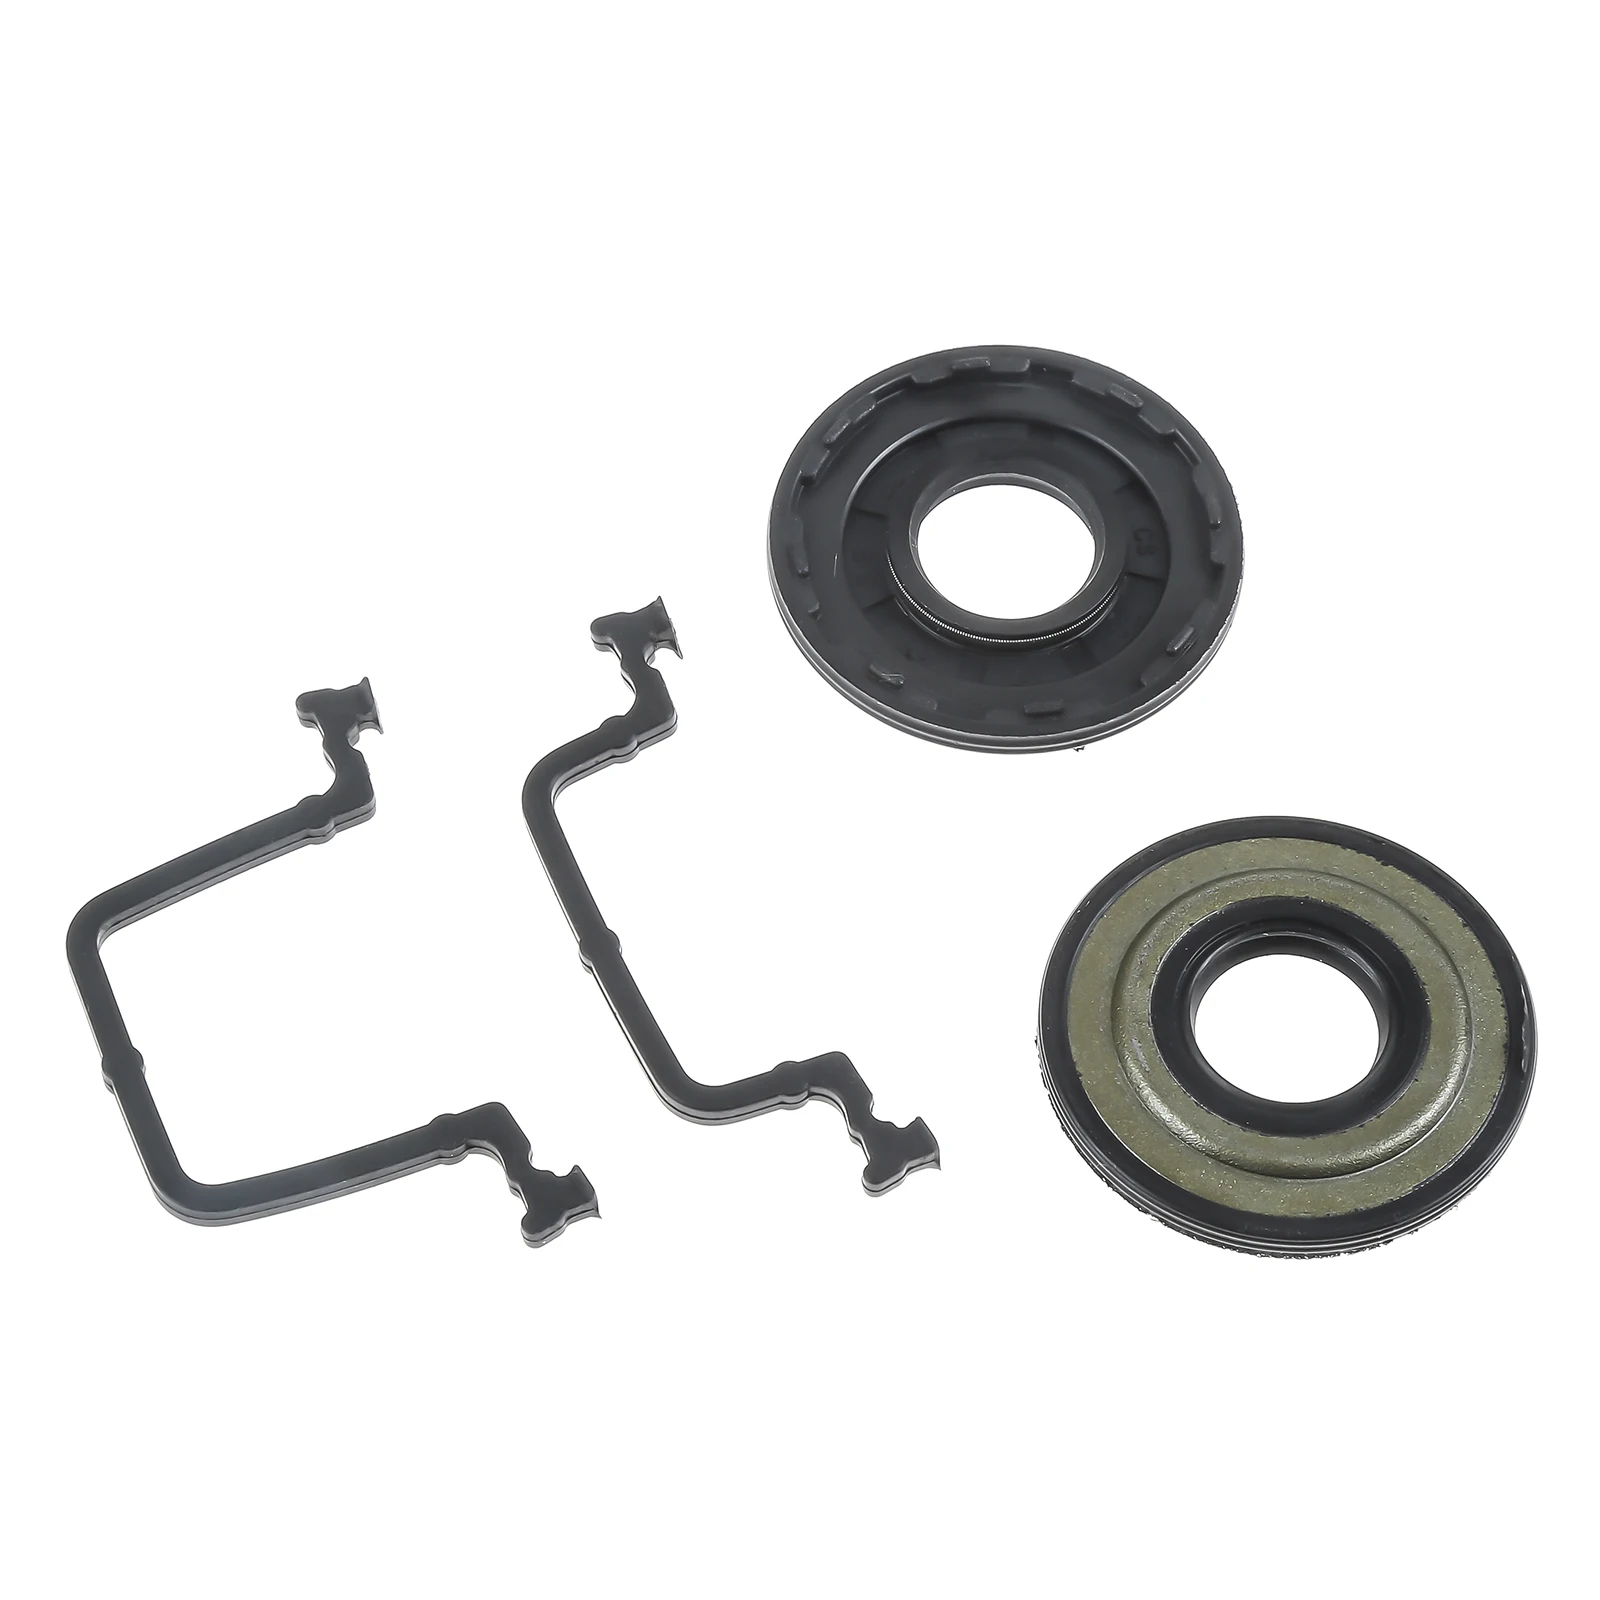 

2 Sets Oil Seal w Cylinder Gasket Kit for Husqvarna 445 450 445E 450E Chainsaw Parts Replace Part Number 544108701 544109201